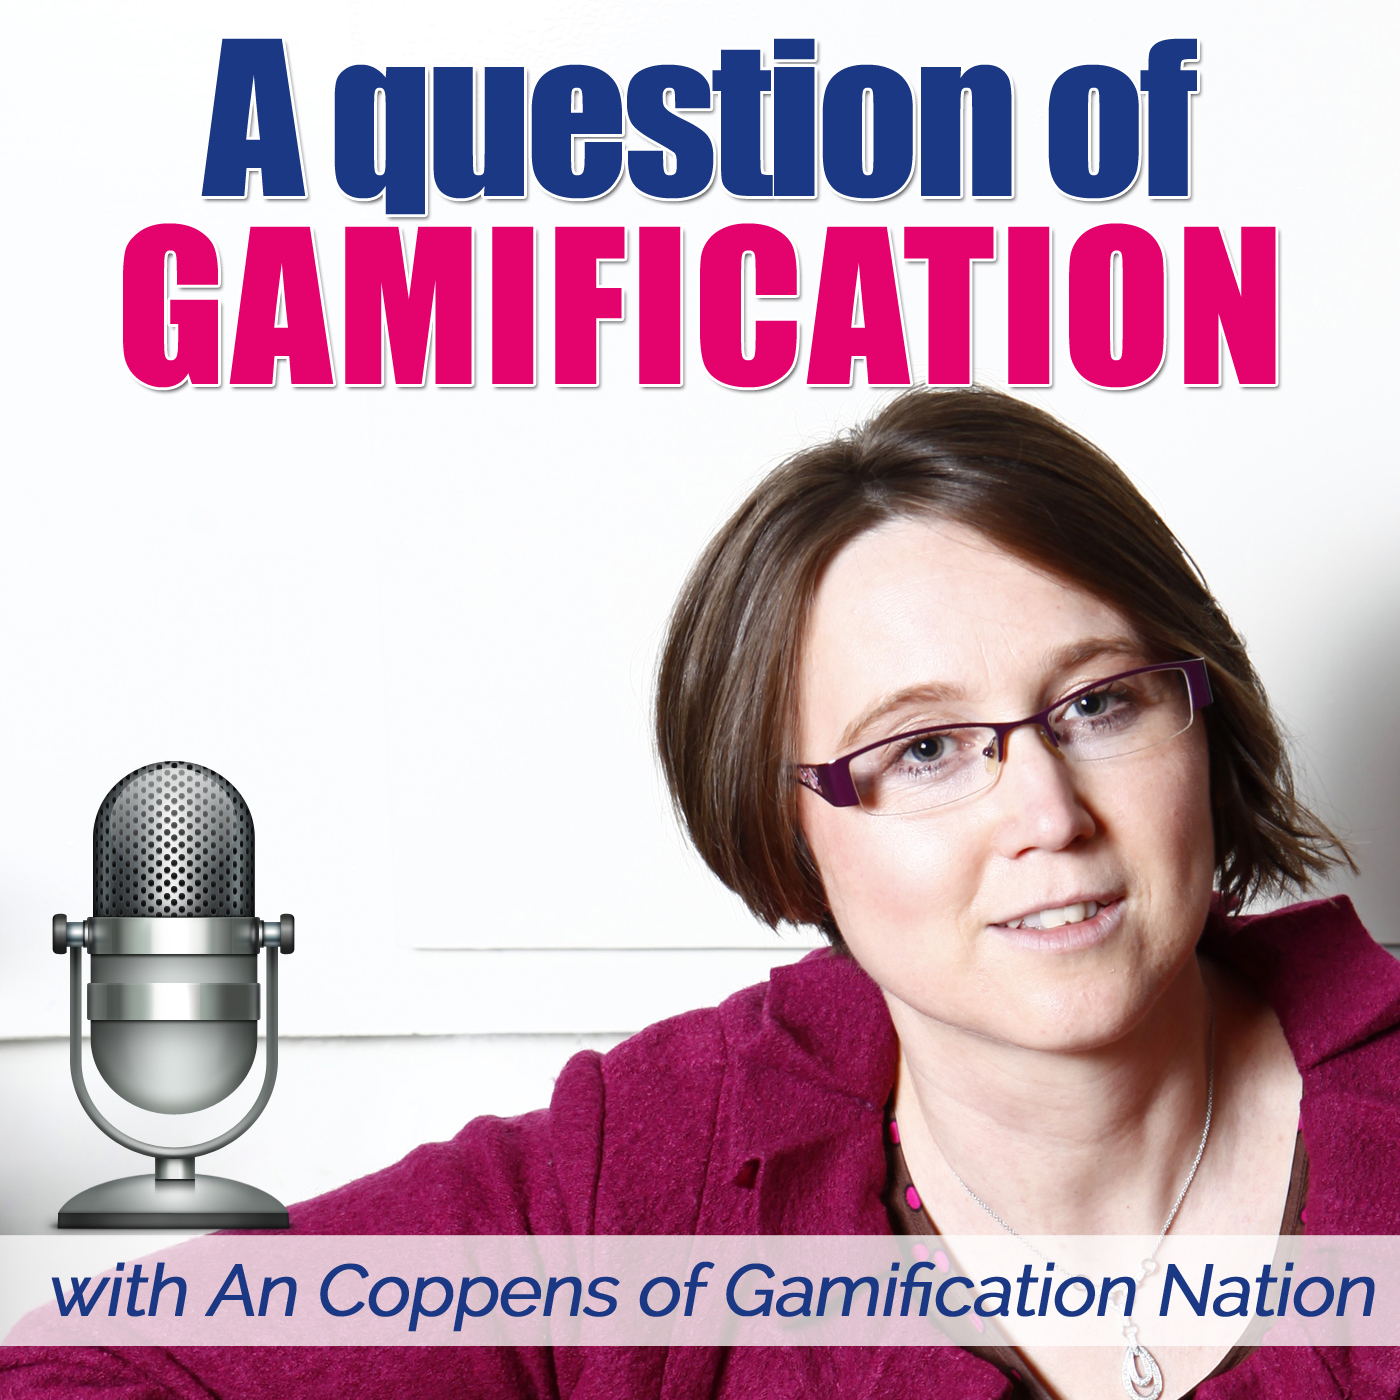 A question of gamification